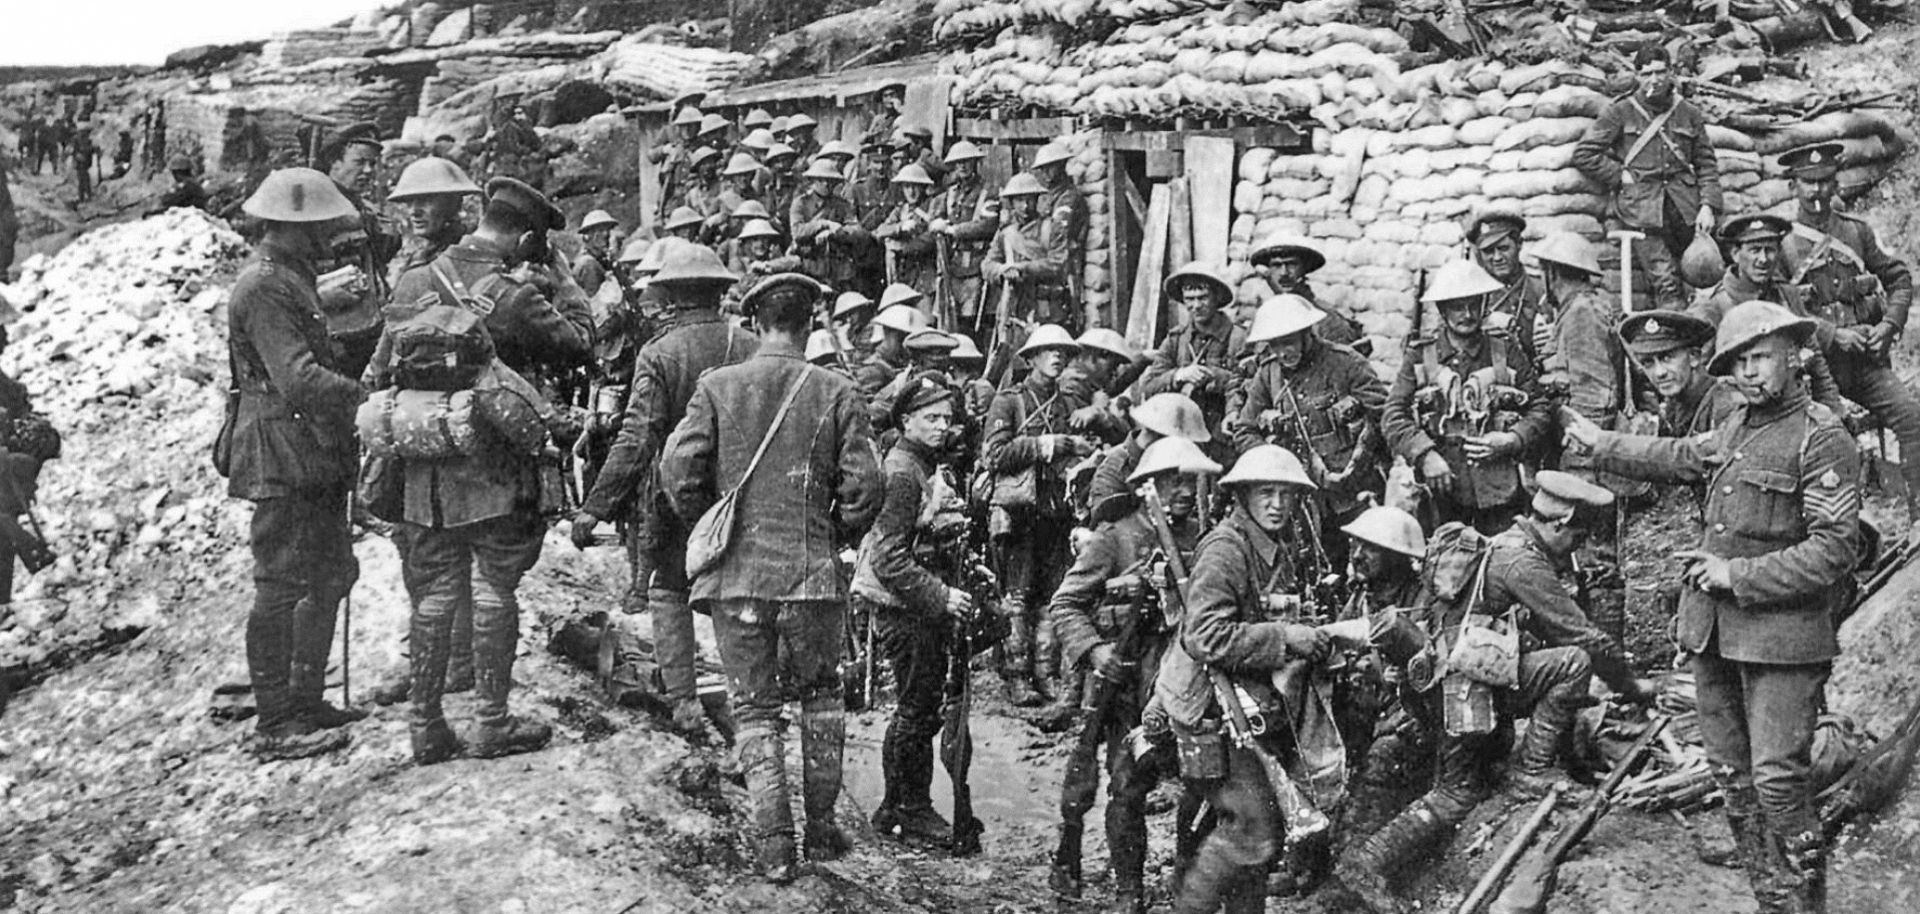 British soldiers from the Public Schools Battalions during the 1916 Battle of the Somme in France.